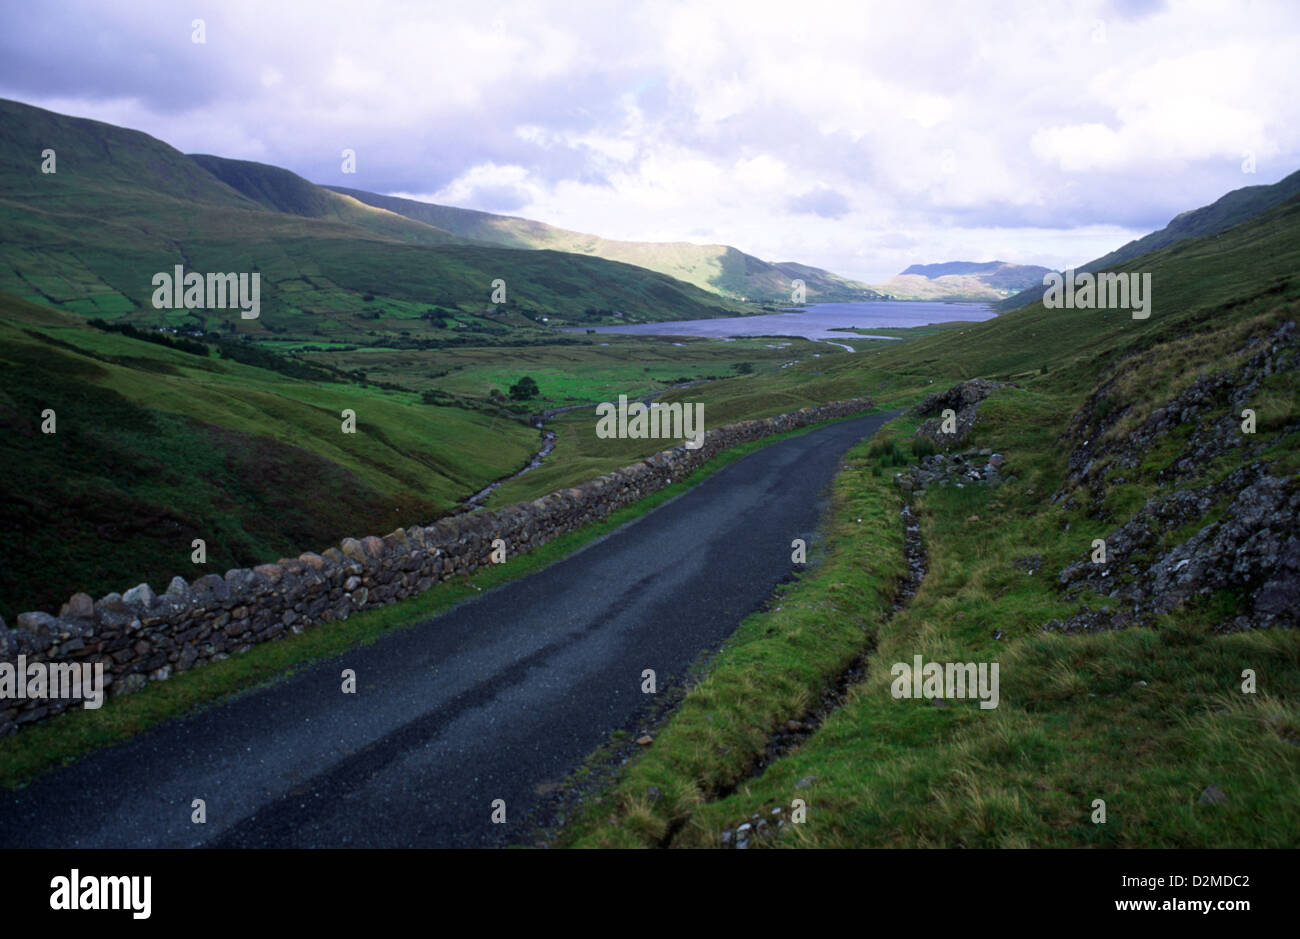 The stunning landscape of Connemara, County Galway , Ireland with Lough Nafooey in Joyce Country. Stock Photo